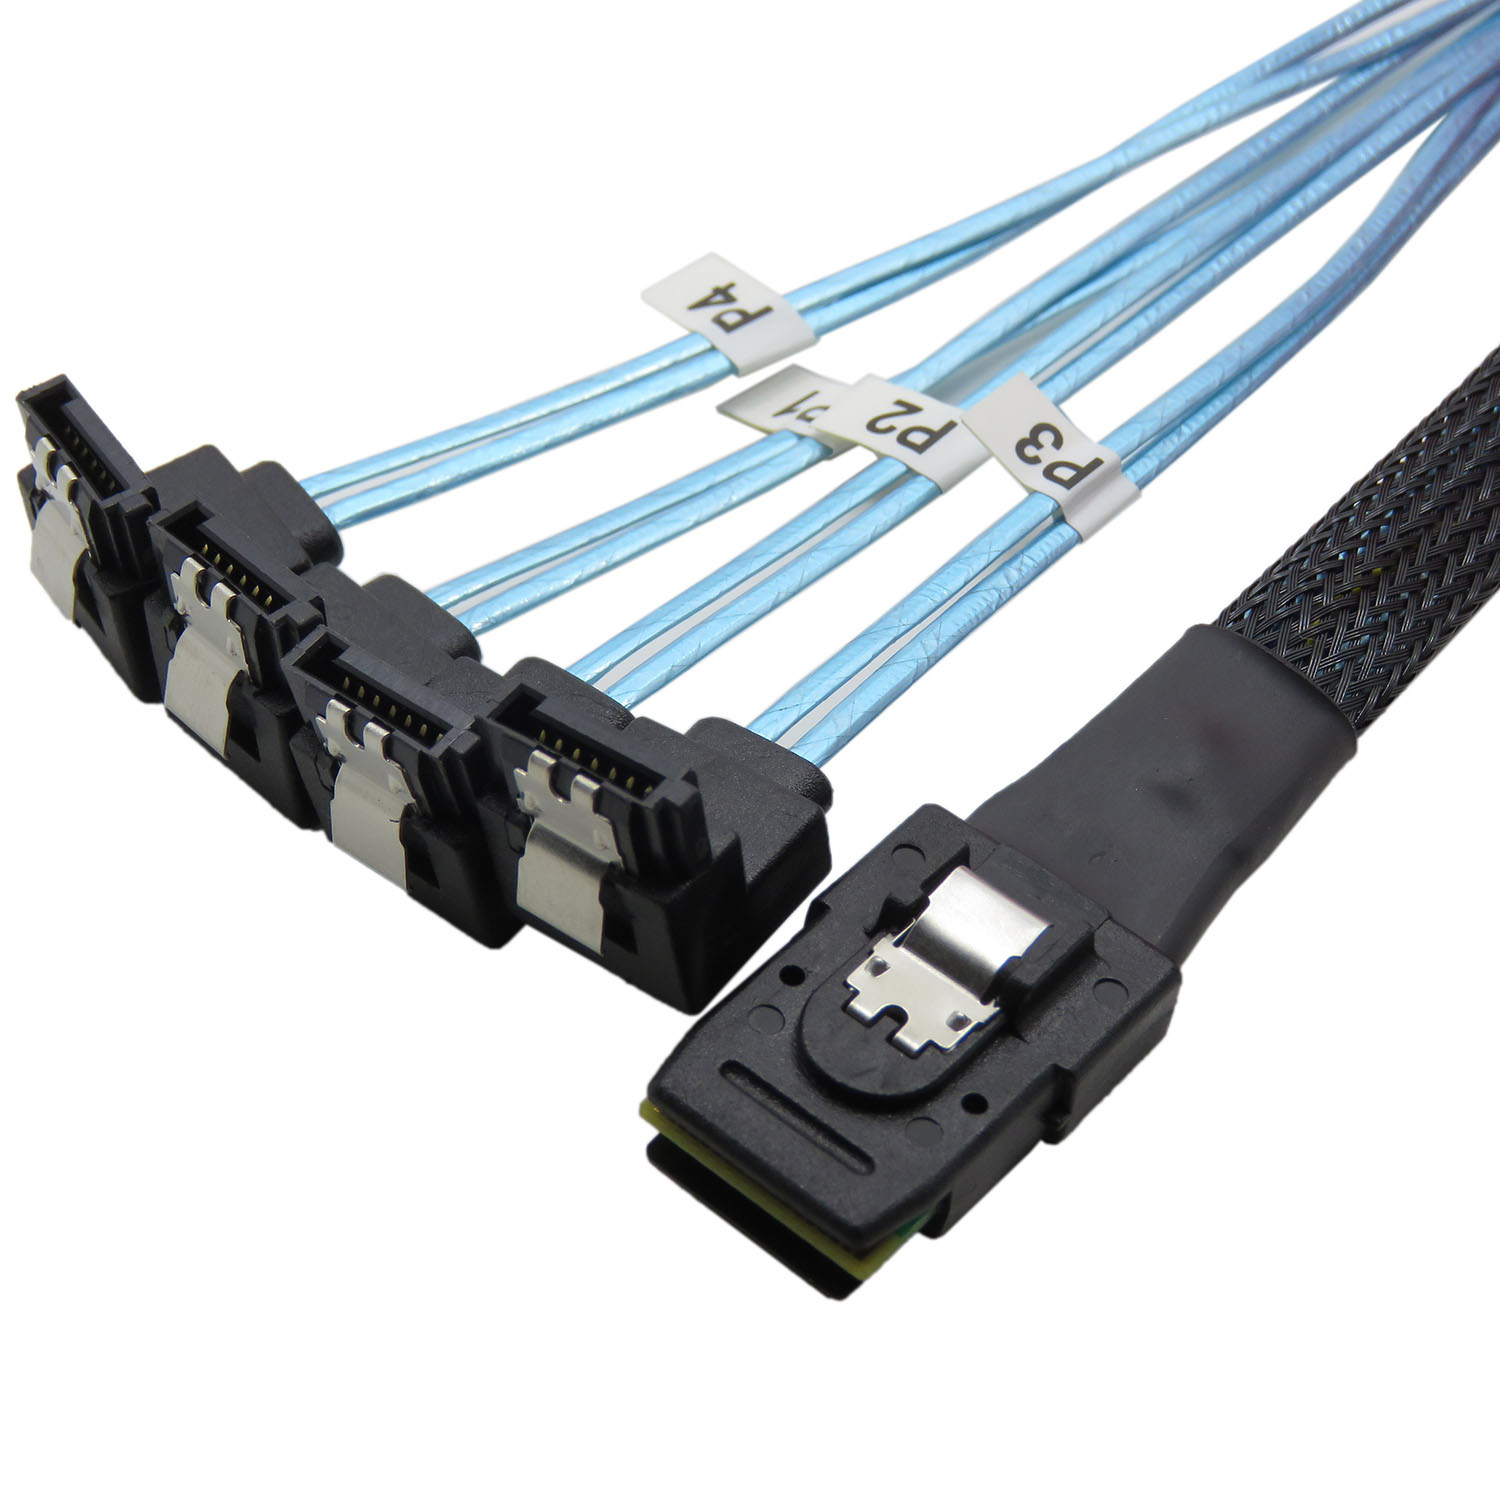 SFF-8482 connectors with SATA power 0.75m 4 Internal miniSAS SFF-8087 to 